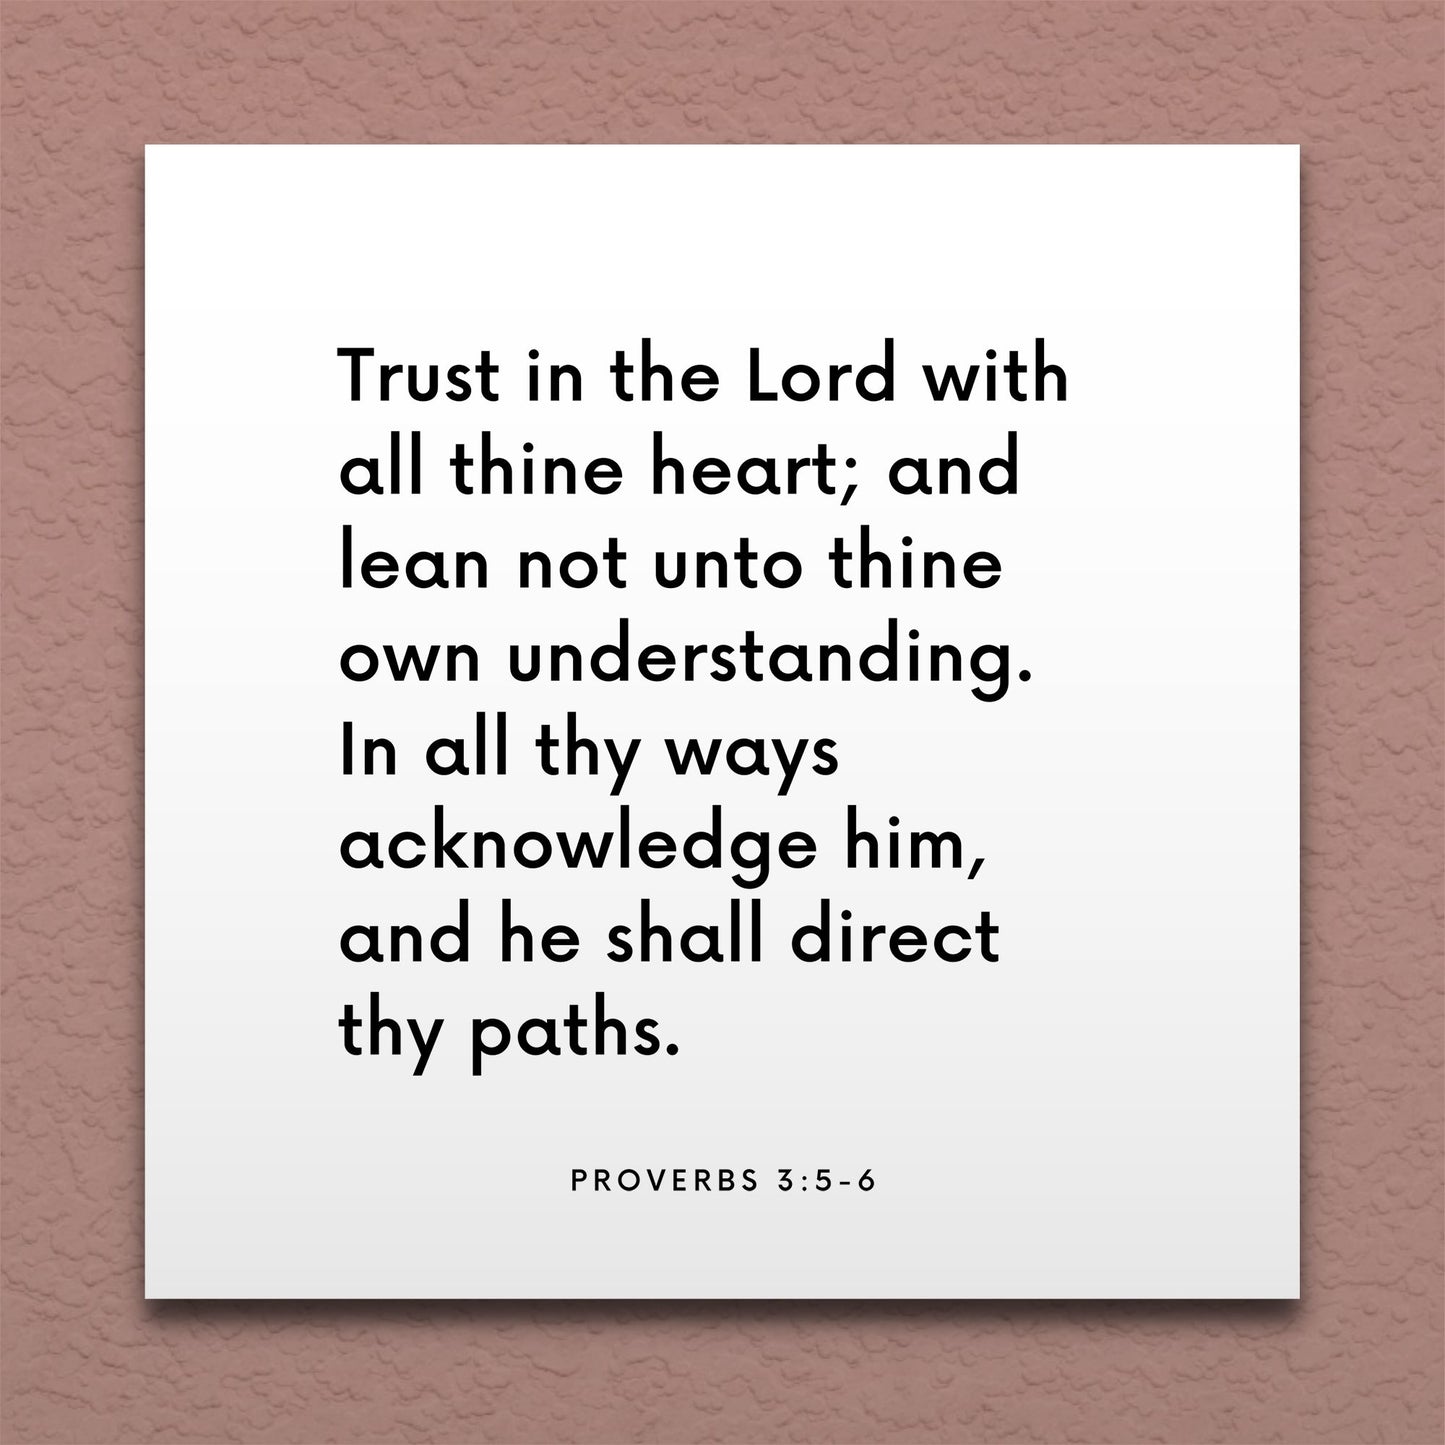 Wall-mounted scripture tile for Proverbs 3:5-6 - "Trust in the Lord with all thine heart"